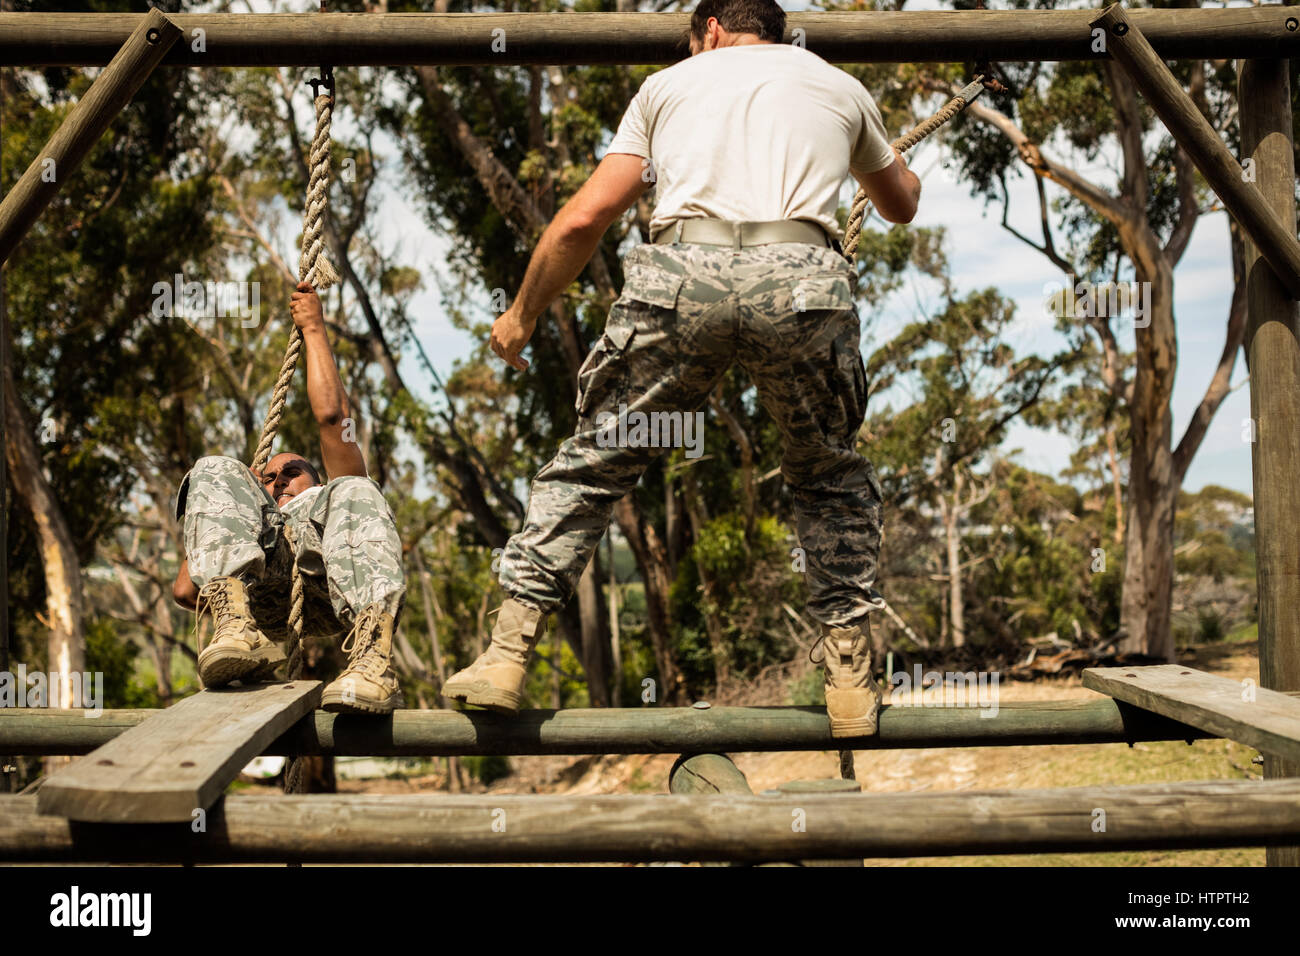 Military soldiers training rope climbing at boot camp Stock Photo